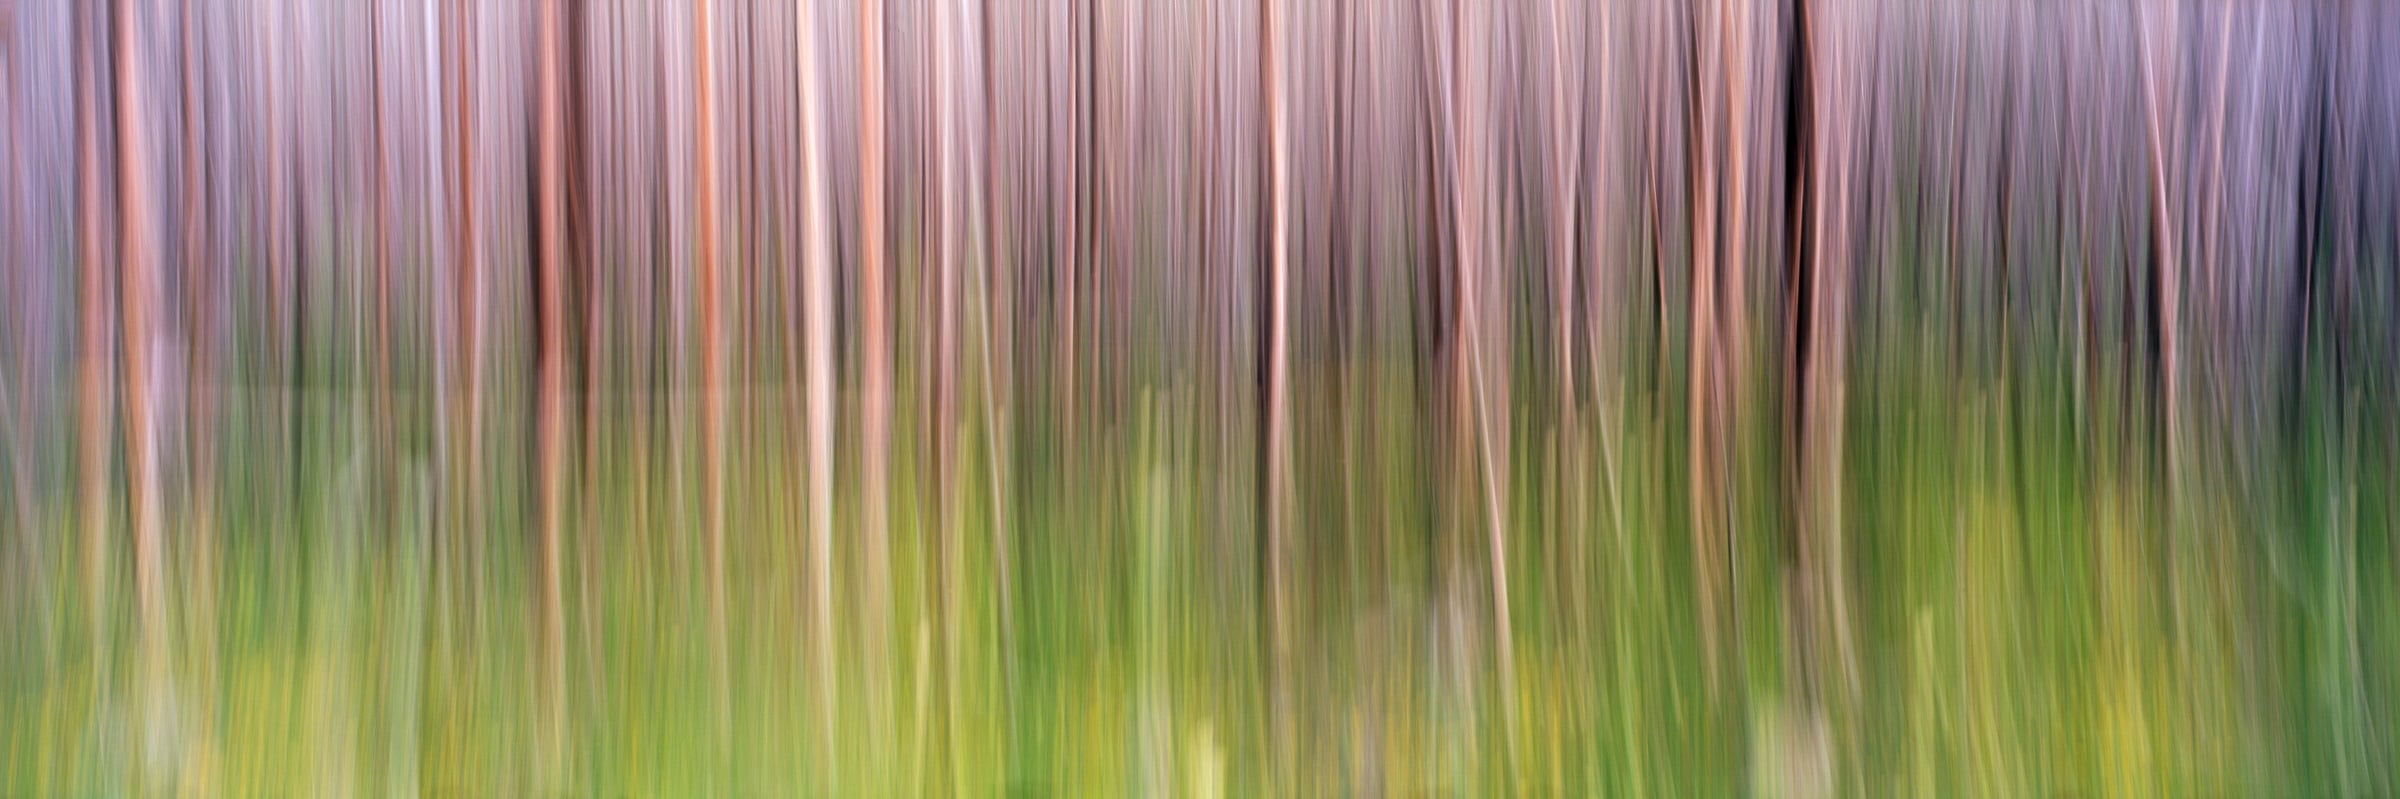 335 megapixels! A very high resolution, large-format, abstract forest photo; fine art photograph created by Scott Dimond in Waterton National Park, Alberta, Canada